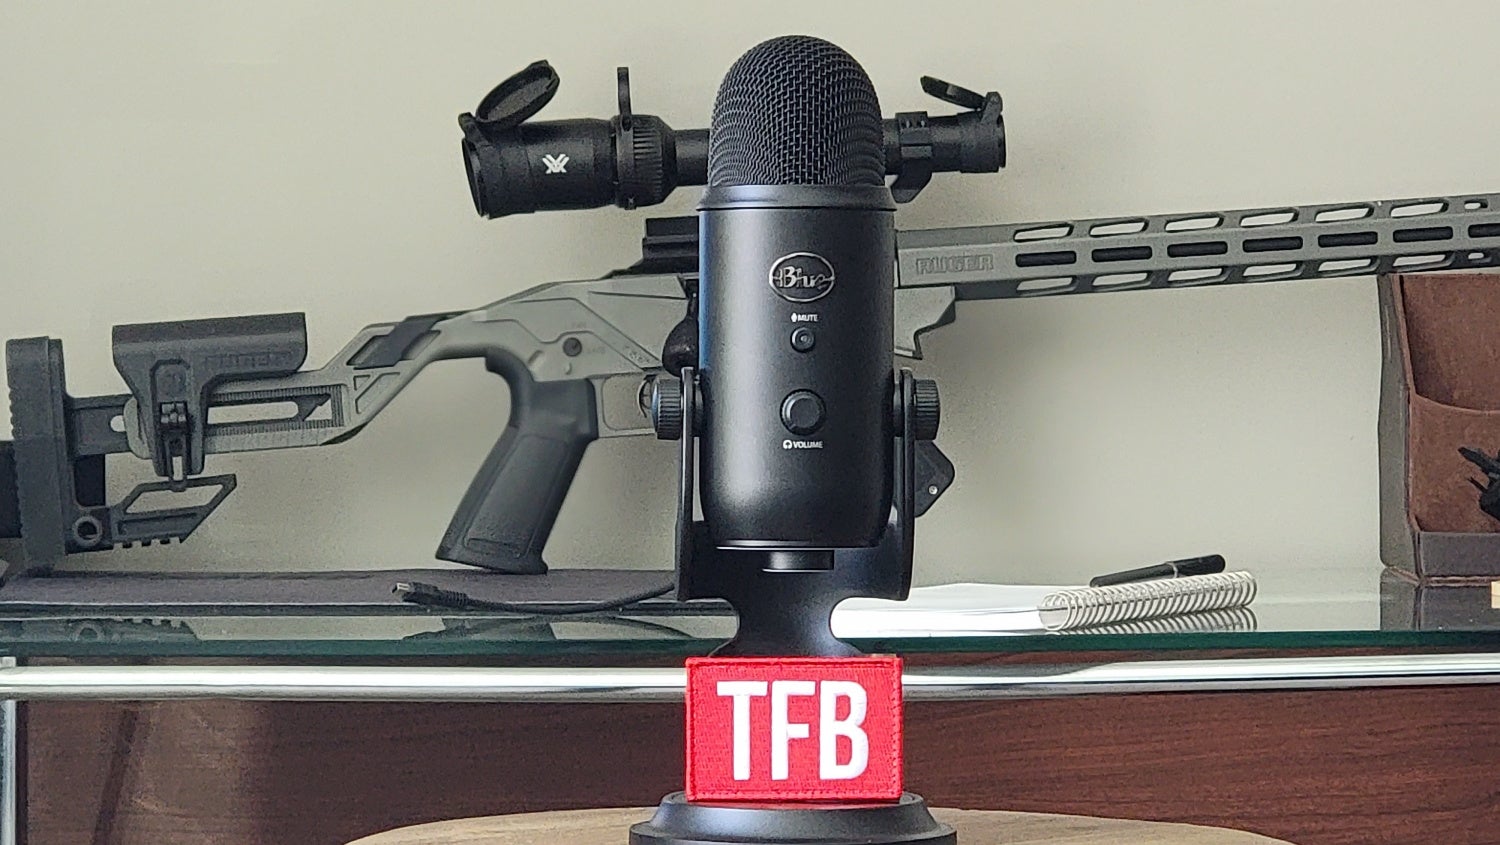 TFB Podcast Roundup 37: Episodes for Armed Citizens